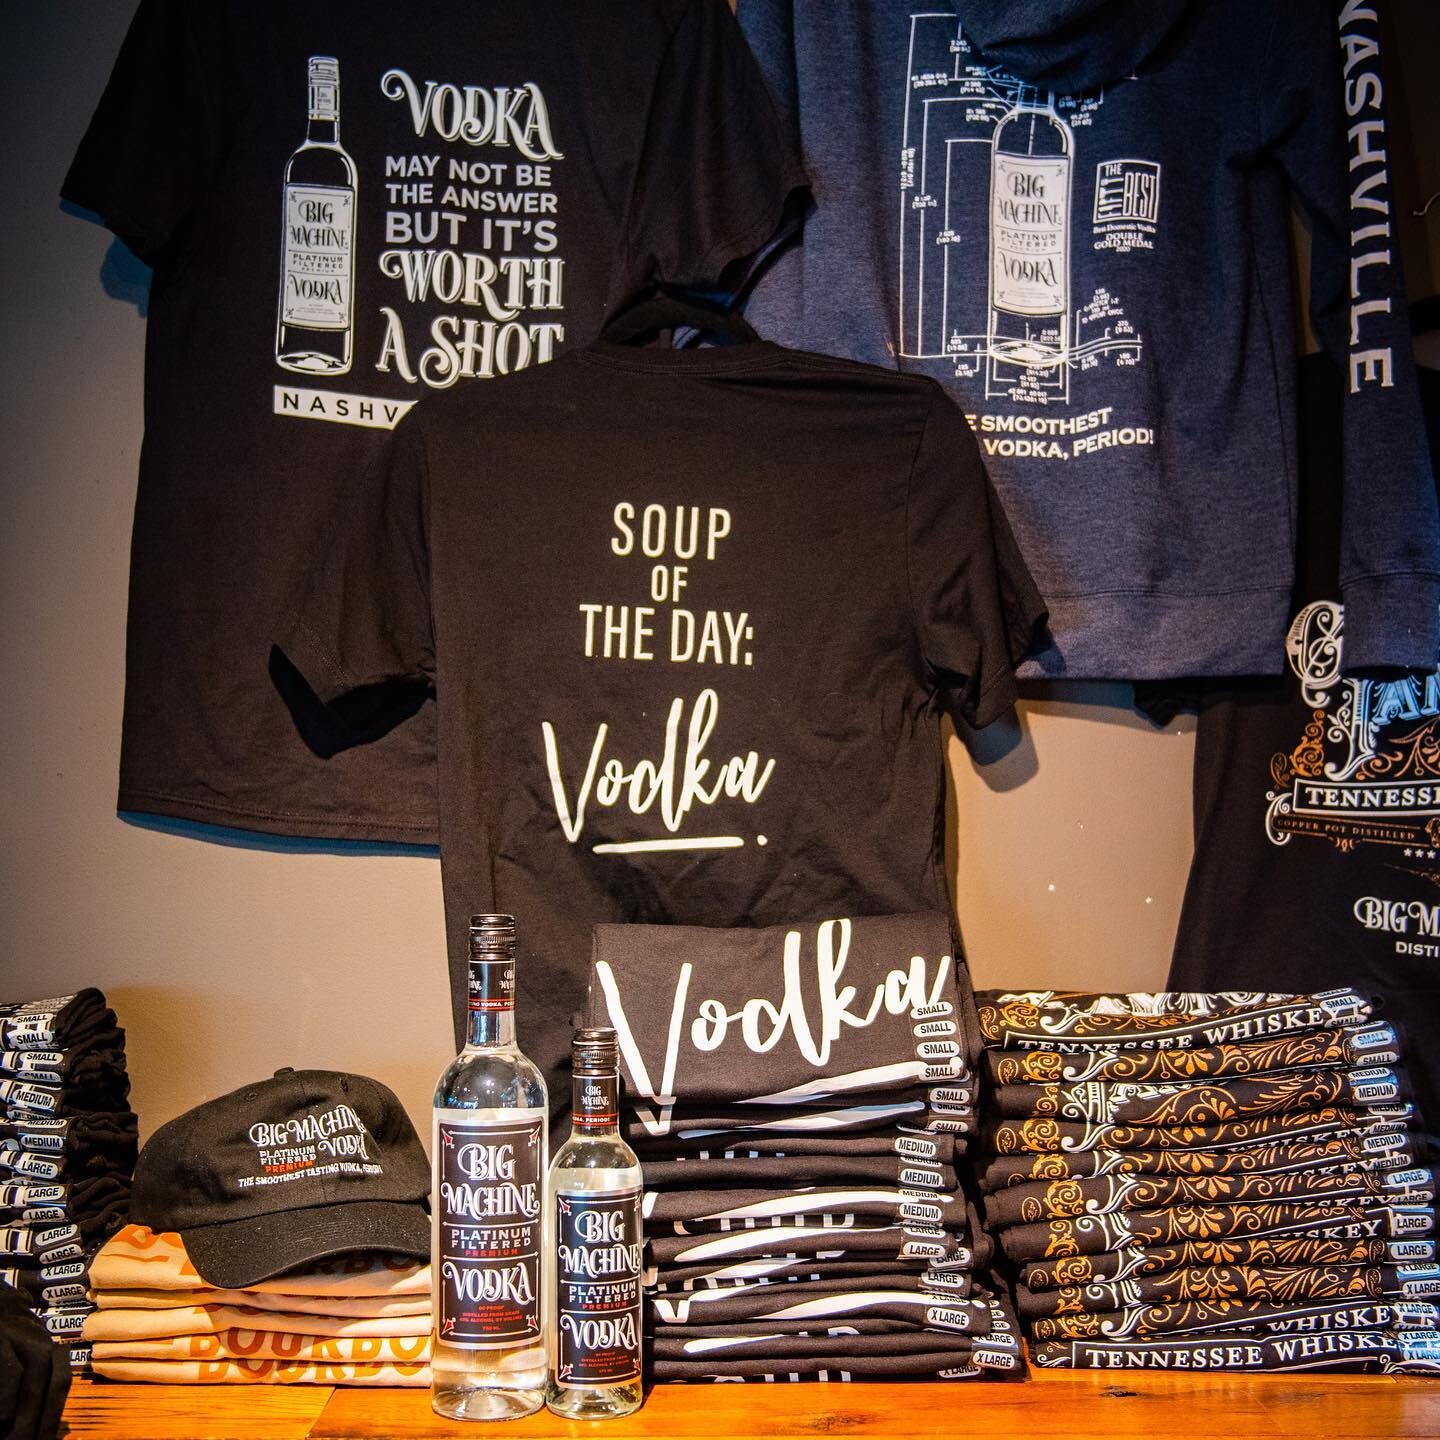 Soup of the day: Vodka. Our new T-shirts are now available! Stop by today to pick one up!